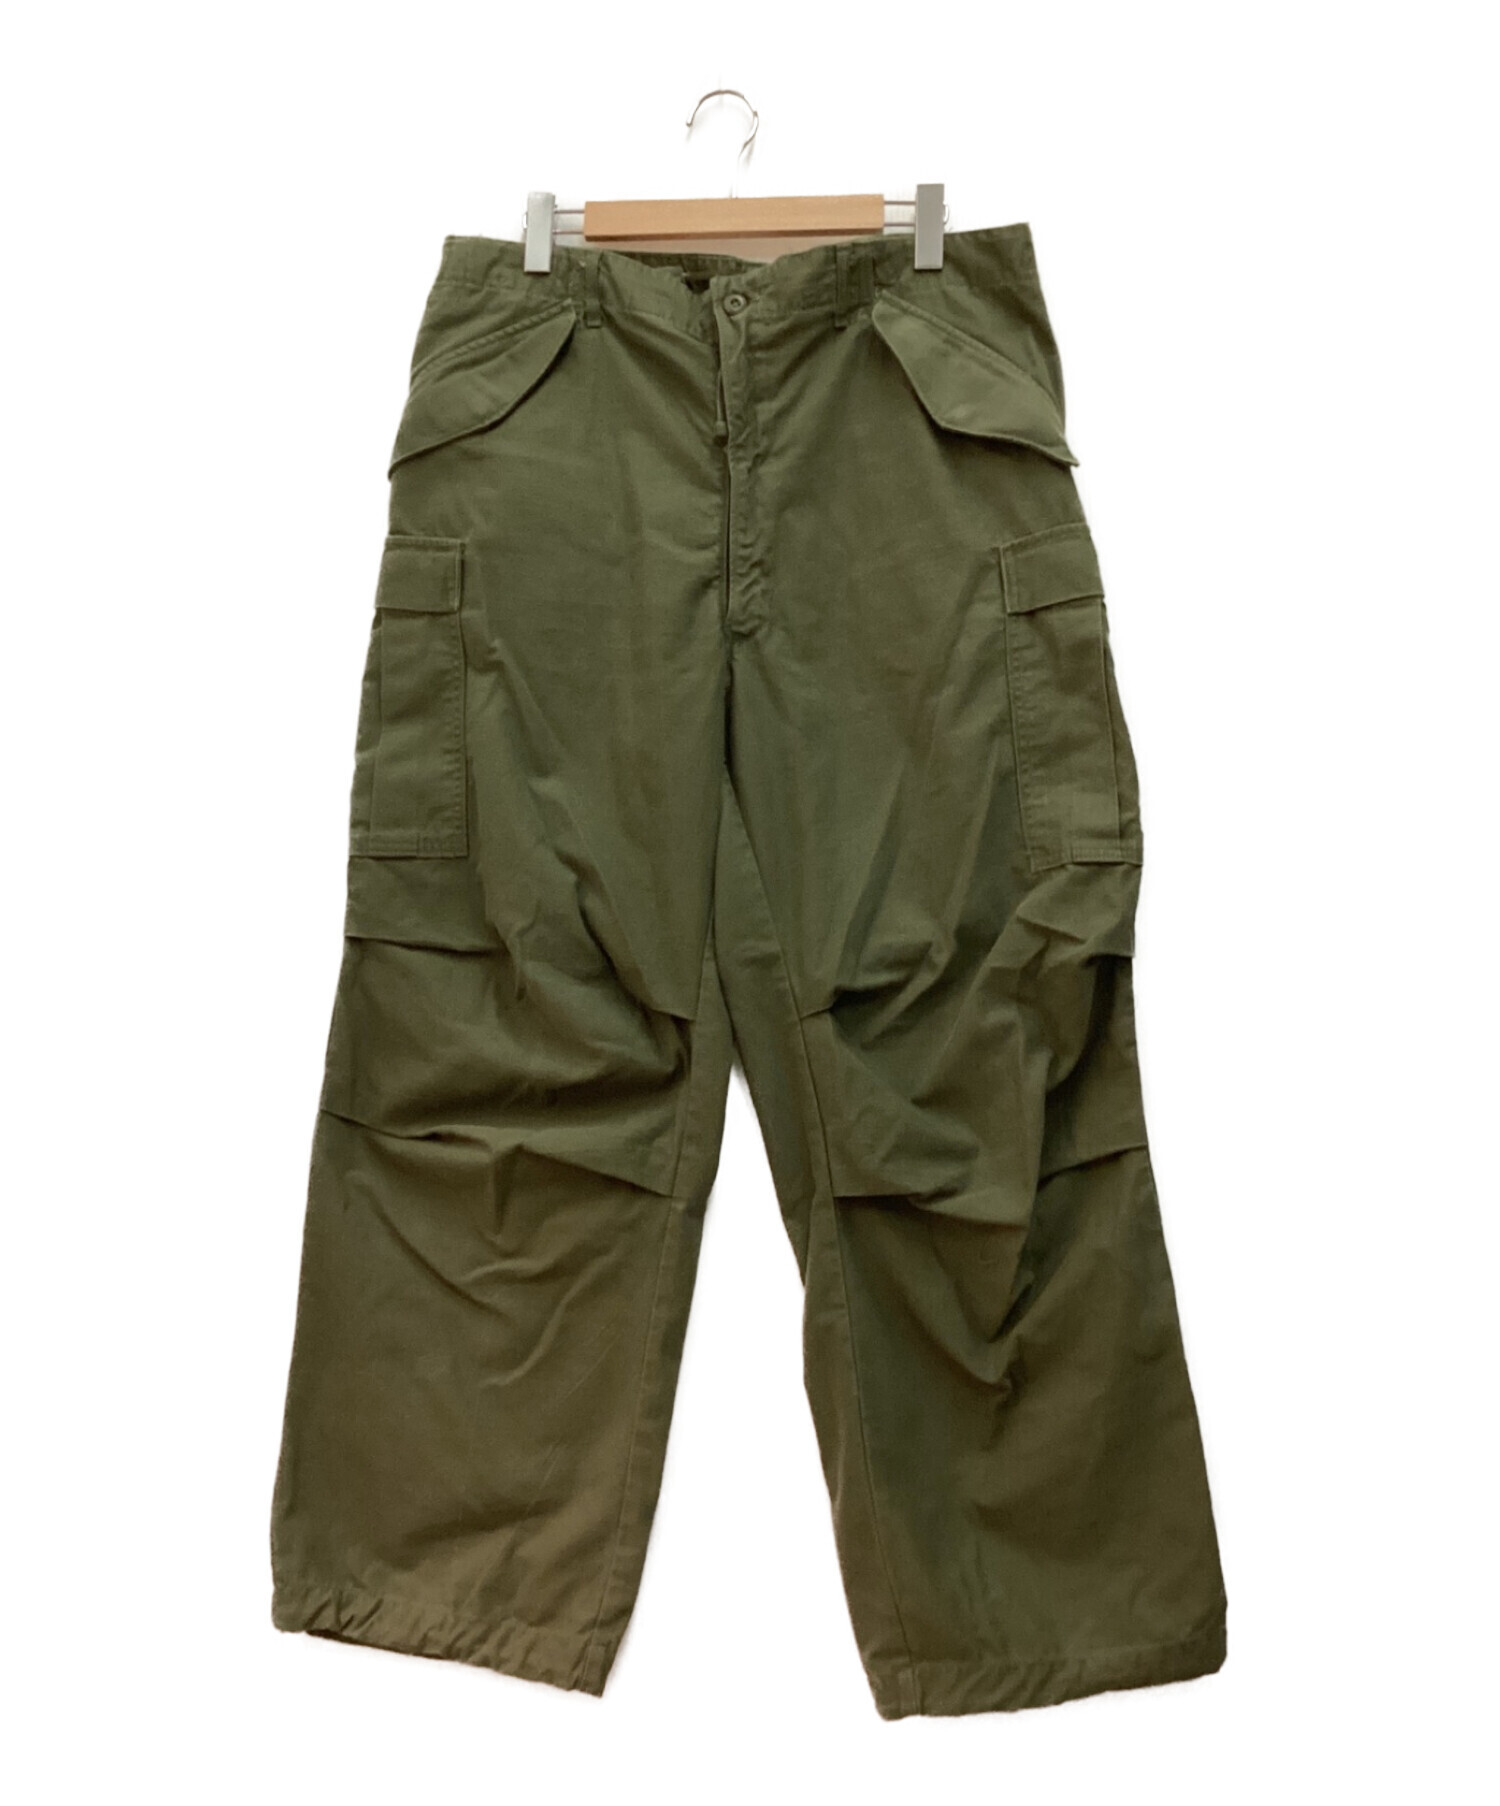 70's us army M65 used cargo pants